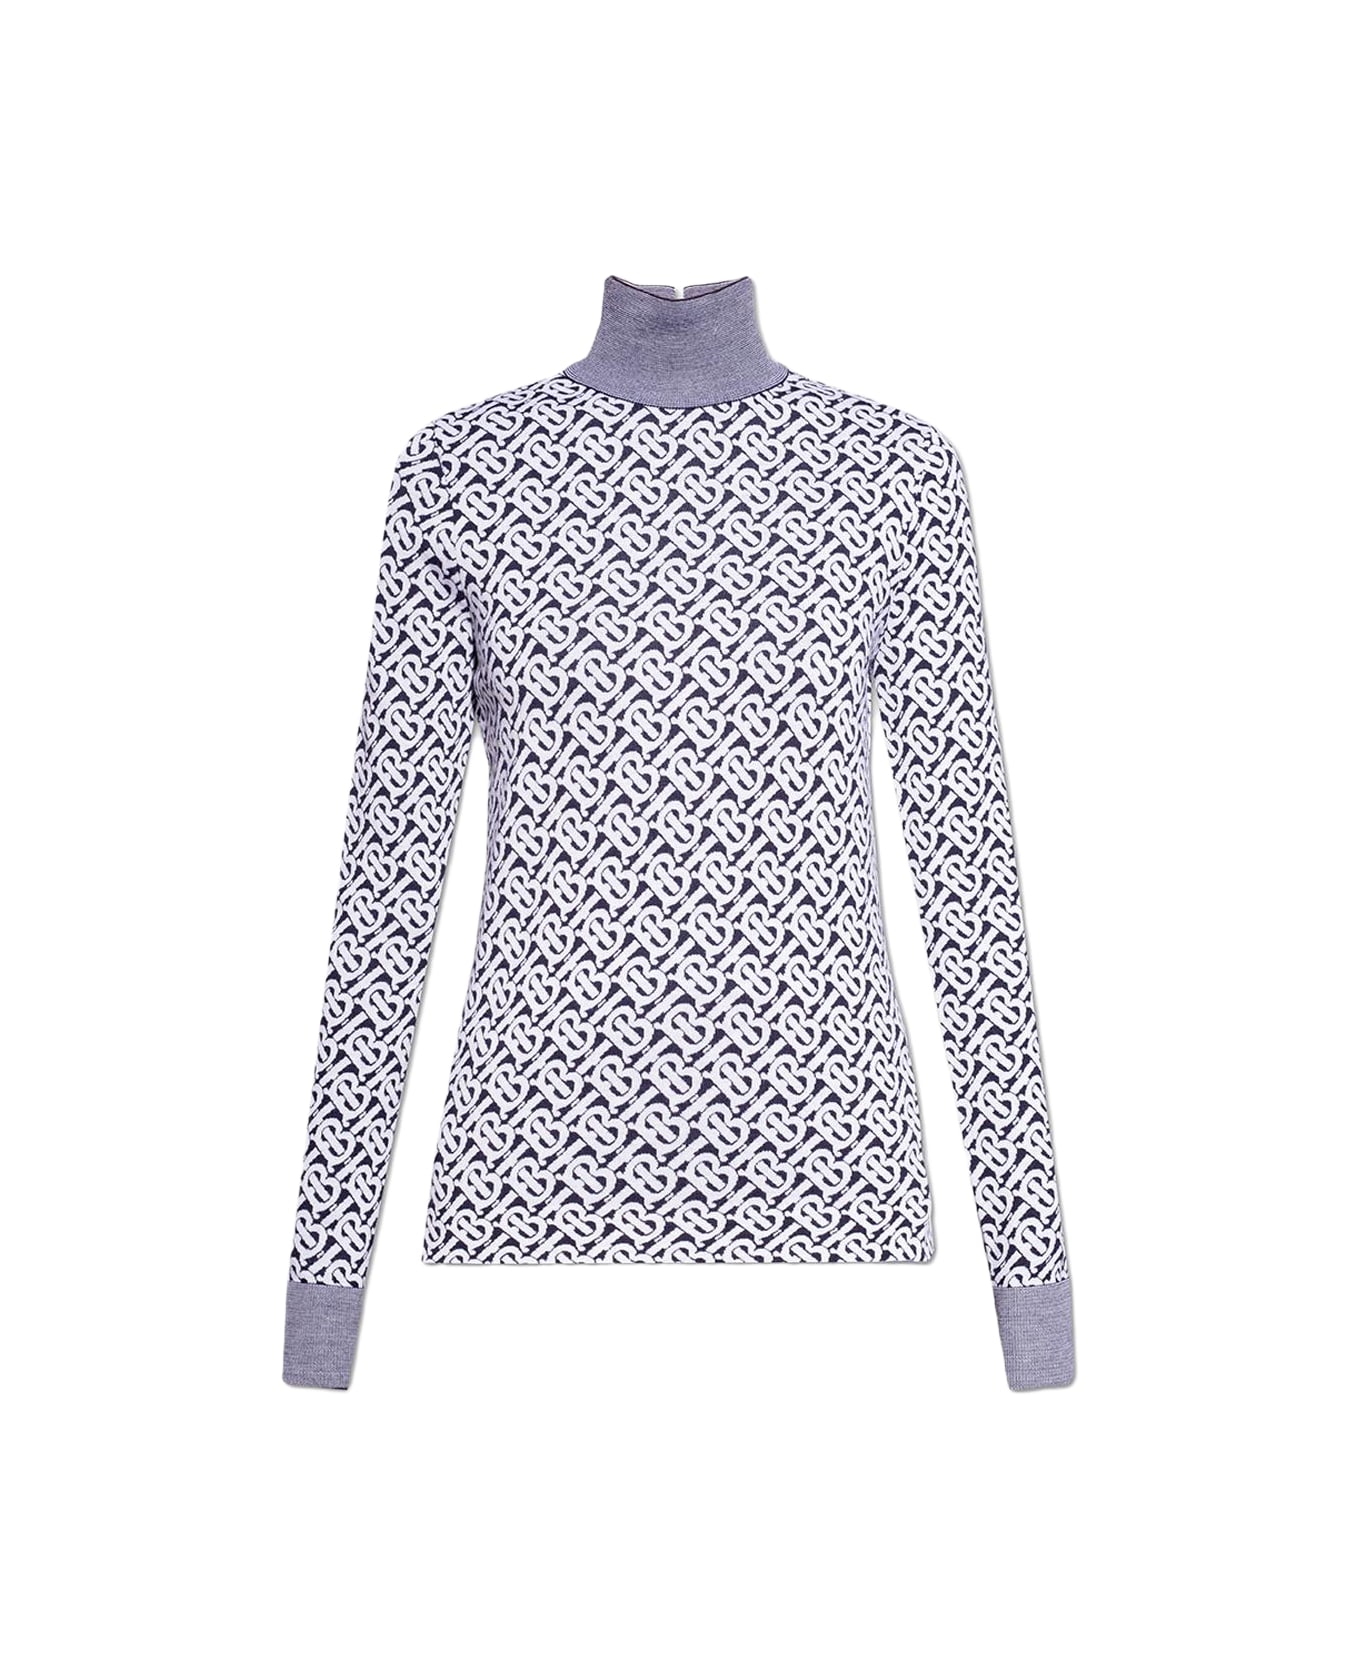 Burberry 'nicky' Top With Stand Collar - GREY